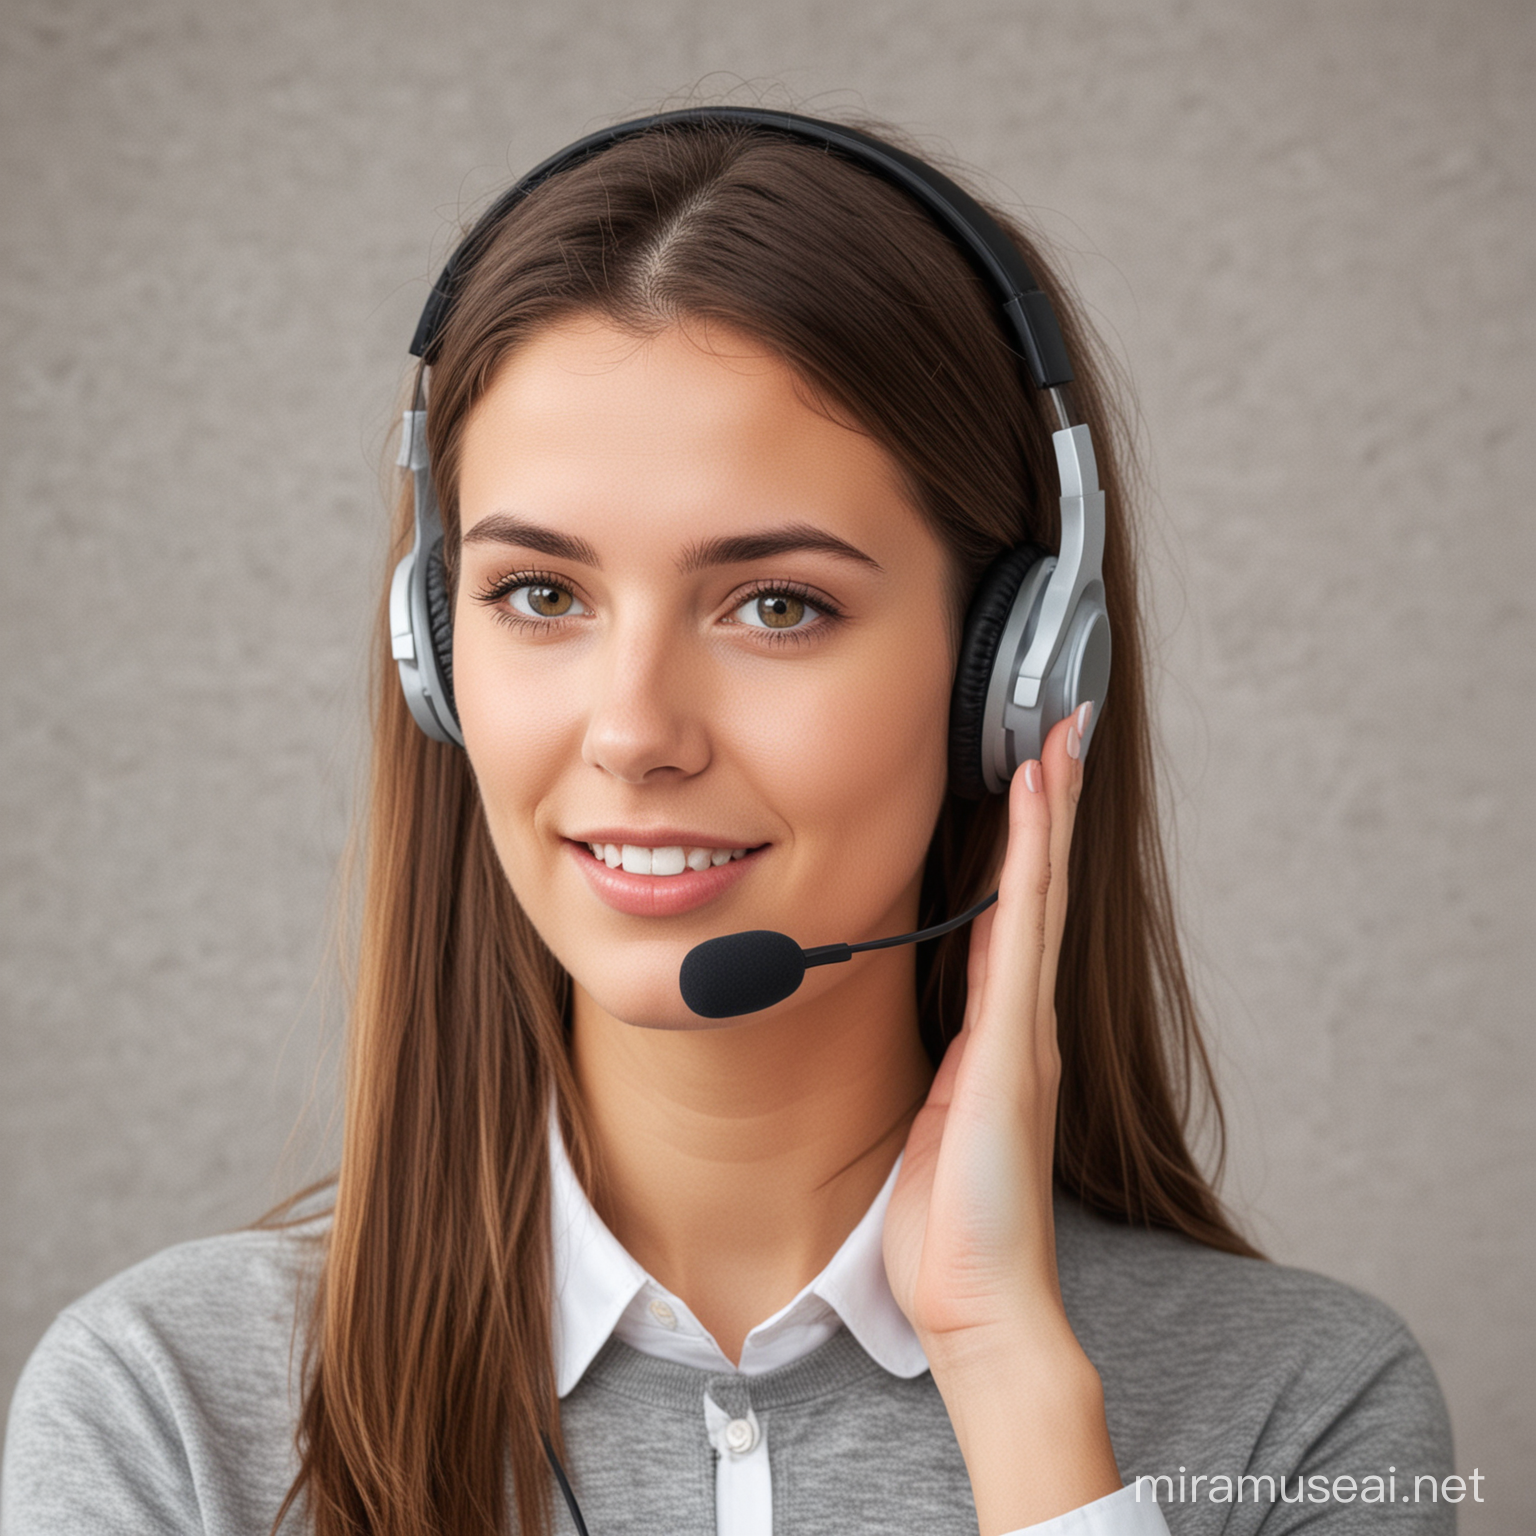 Young Woman with Headset Working in Modern Office